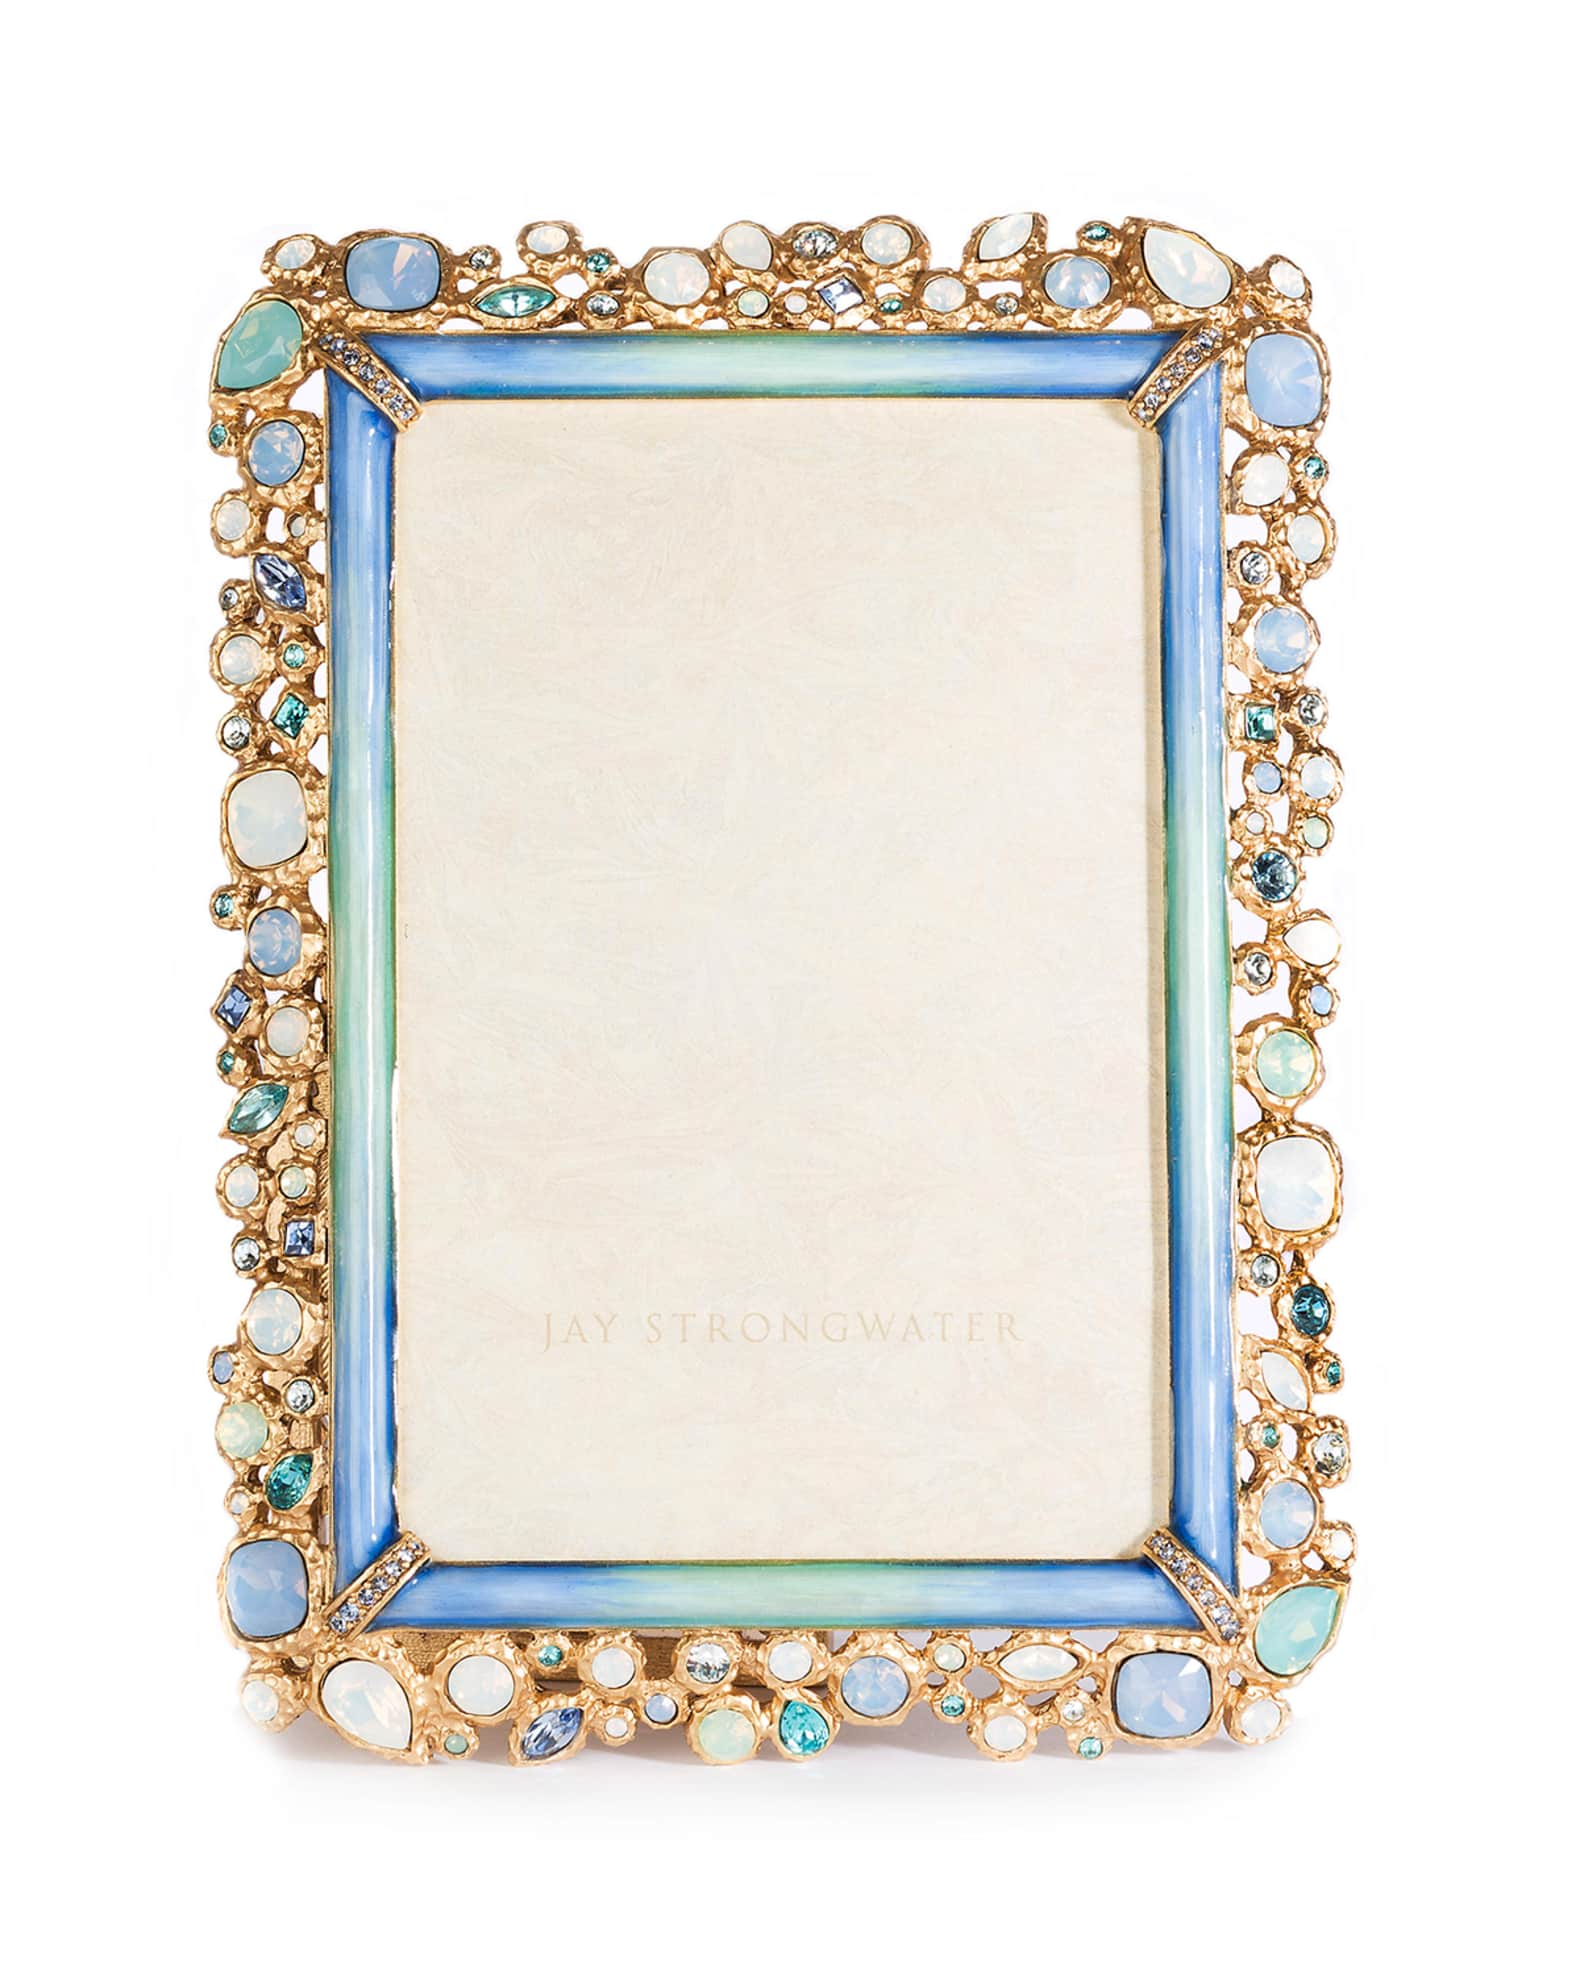 Jay Strongwater Emery Bejeweled Picture Frame, 4" x 6"